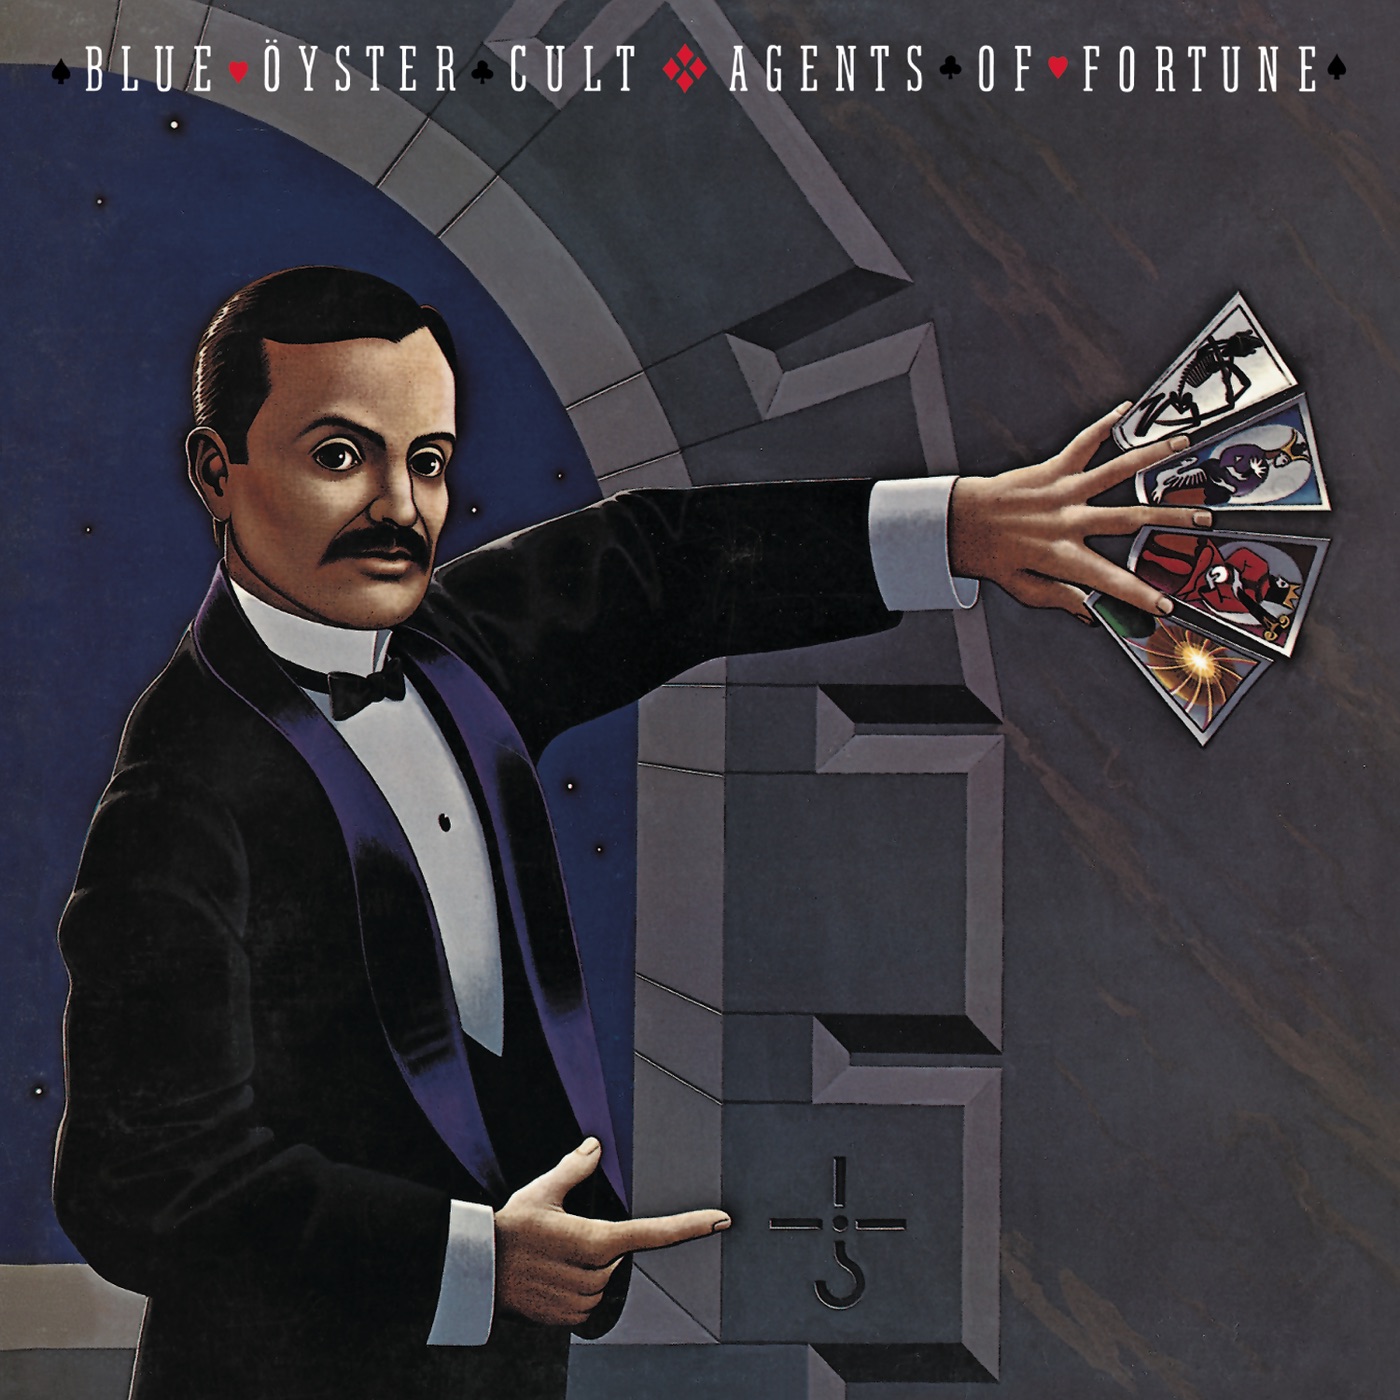 Agents Of Fortune by Blue Öyster Cult